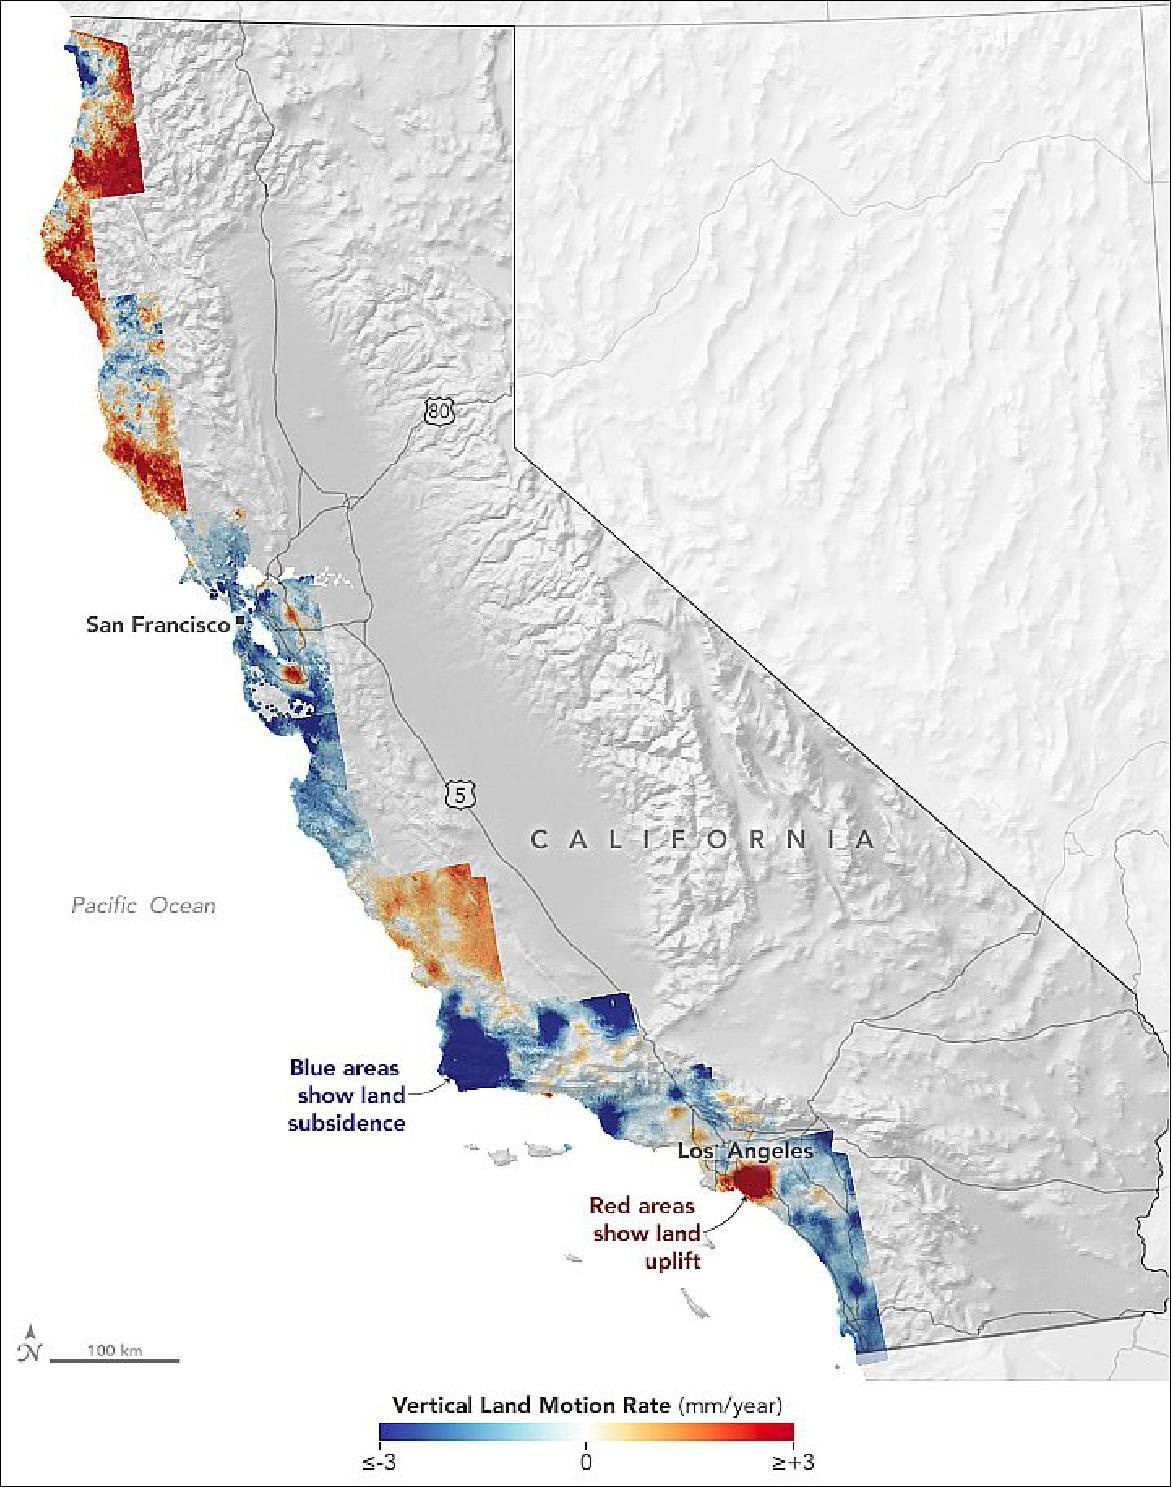 Figure 7: The map highlights the variability in the rising and falling of land across California’s 1000-mile (1,500 km) coast. Areas shown in blue are subsiding, with darker blue areas sinking faster than lighter blue ones. The areas shown in dark red are rising the fastest. The map was created by comparing thousands of scenes of synthetic aperture radar (SAR) data collected between 2007 and 2011 (ALOS) with more collected between 2014 and 2018 (Sentinel-1A). Blackwell and colleagues looked for differences in the data—a processing technique known as interferometric synthetic aperture radar (InSAR). [image credit: NASA Earth Observatory images by Lauren Dauphin, using data from Blackwell, Em, et al. (2020) and topographic data from the Shuttle Radar Topography Mission (SRTM). Story by Adam Voiland]